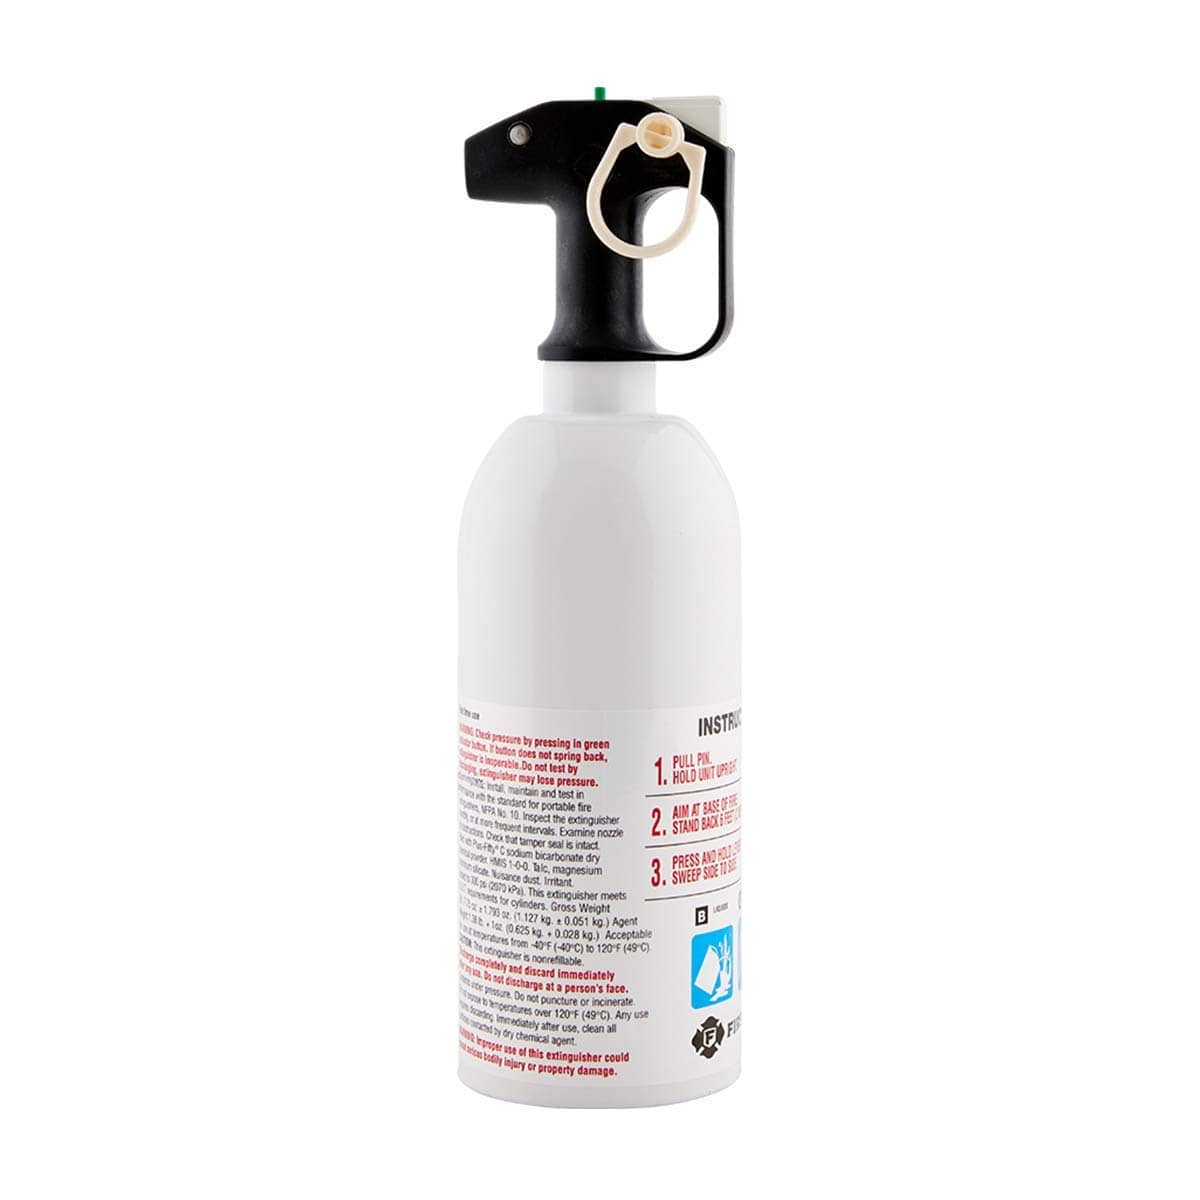 First Alert KITCHEN Fire Extinguisher is among the best fire extinguishers for the home